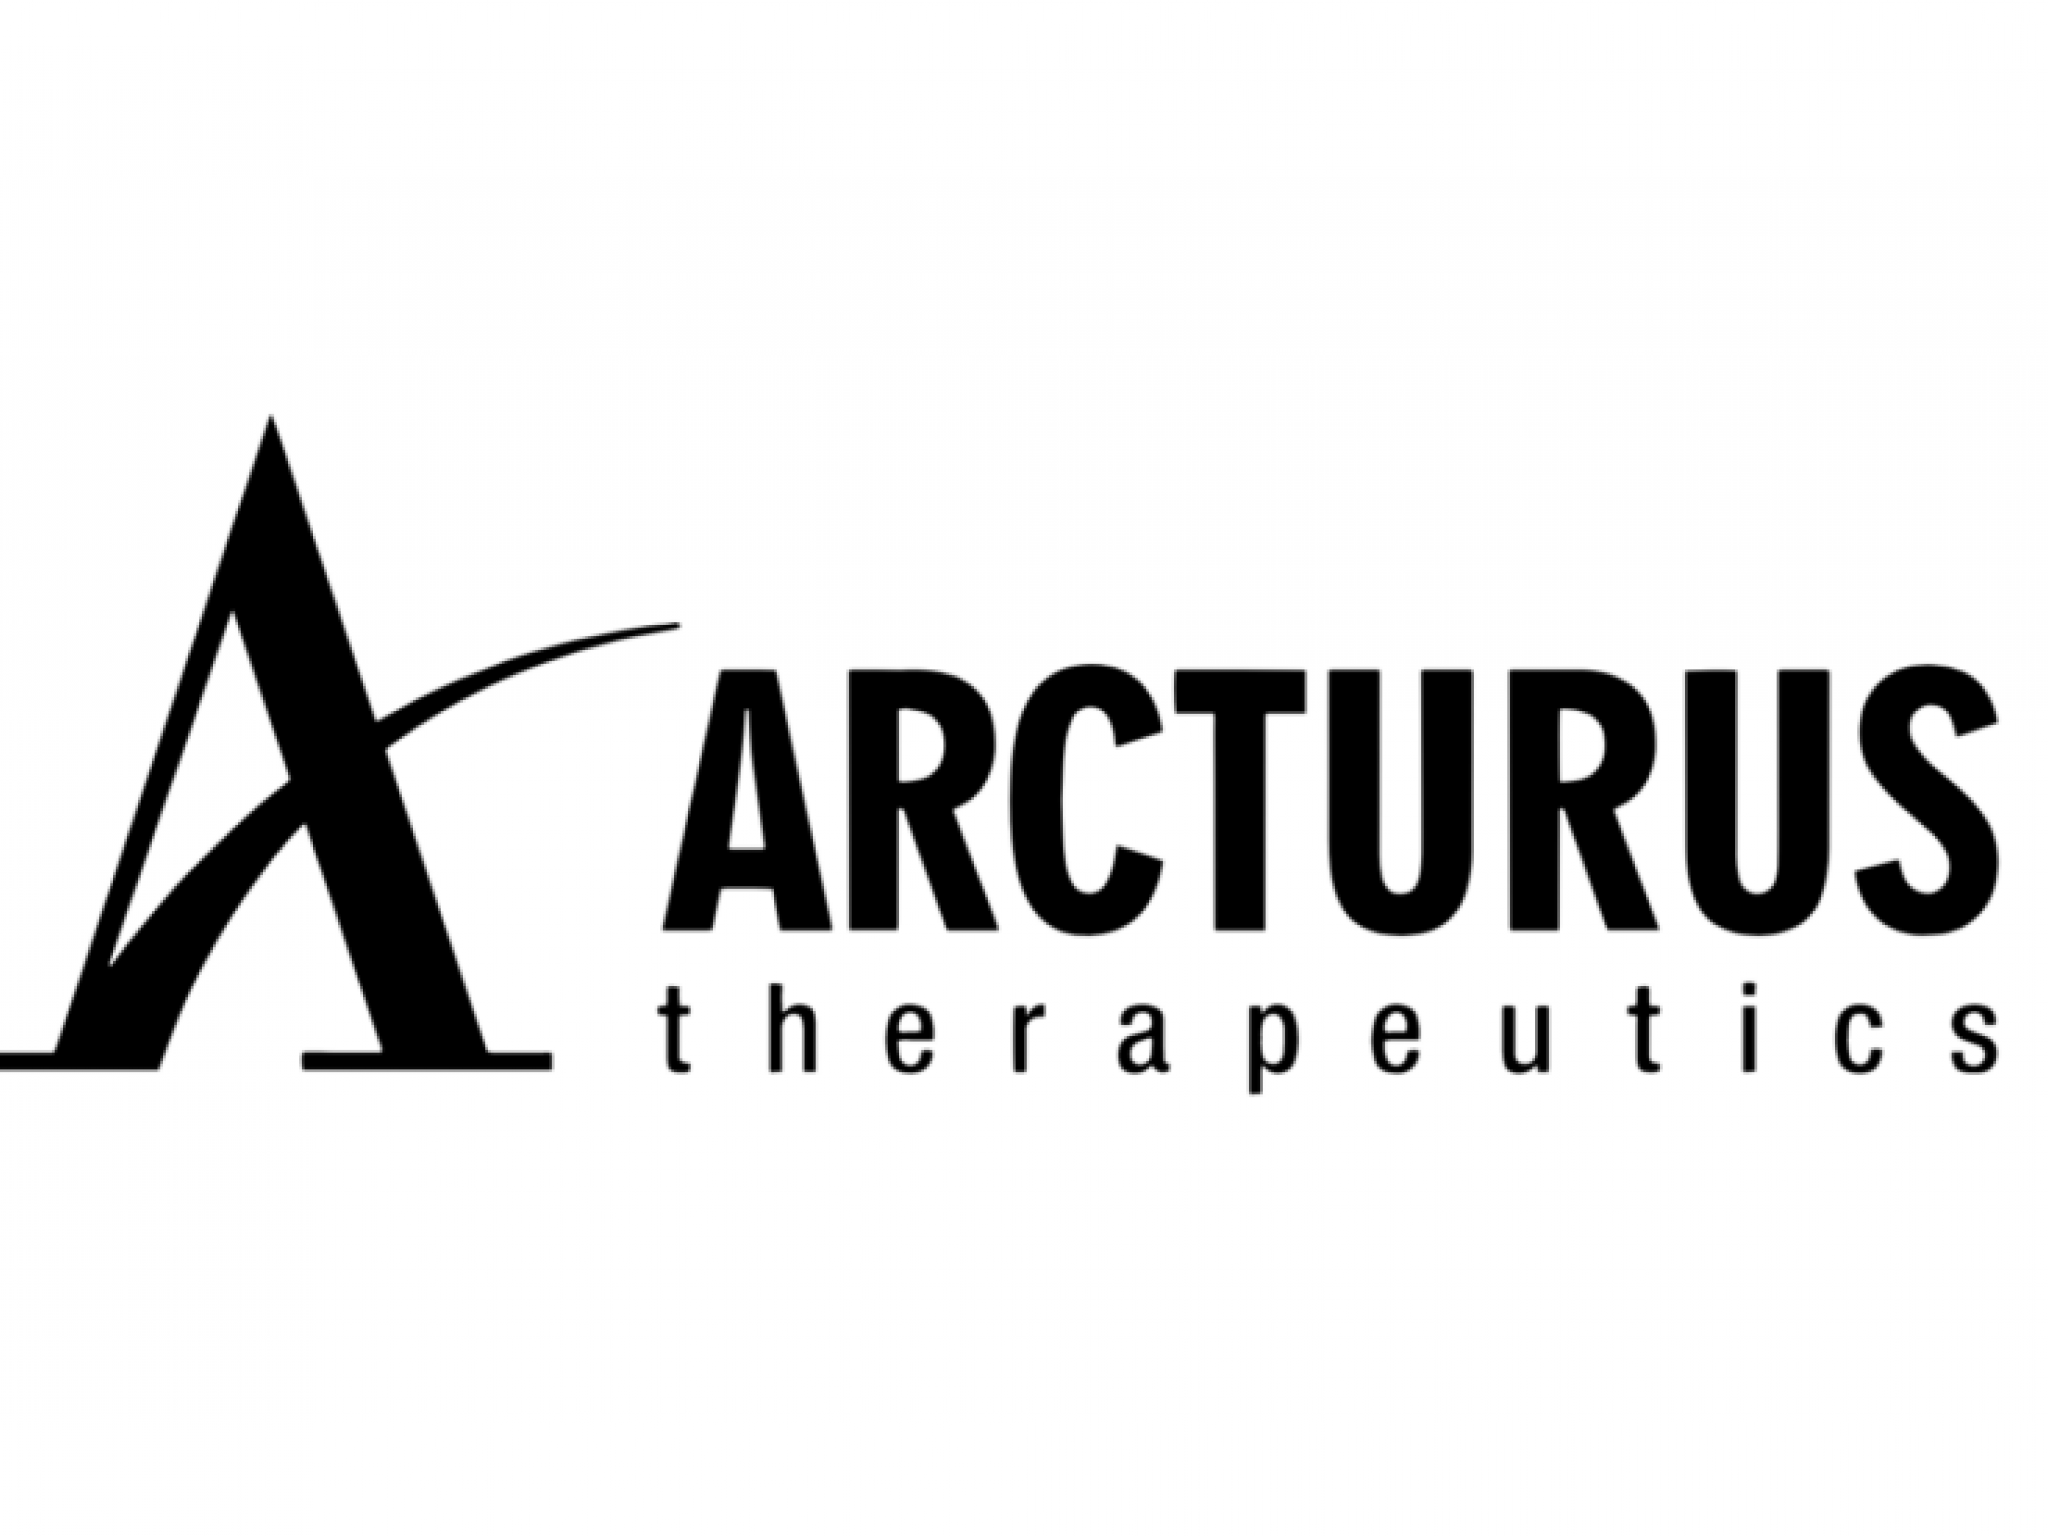  arcturus-therapeutics-early-cystic-fibrosis-trial-results-encouraging---analyst-cautiously-optimistic 